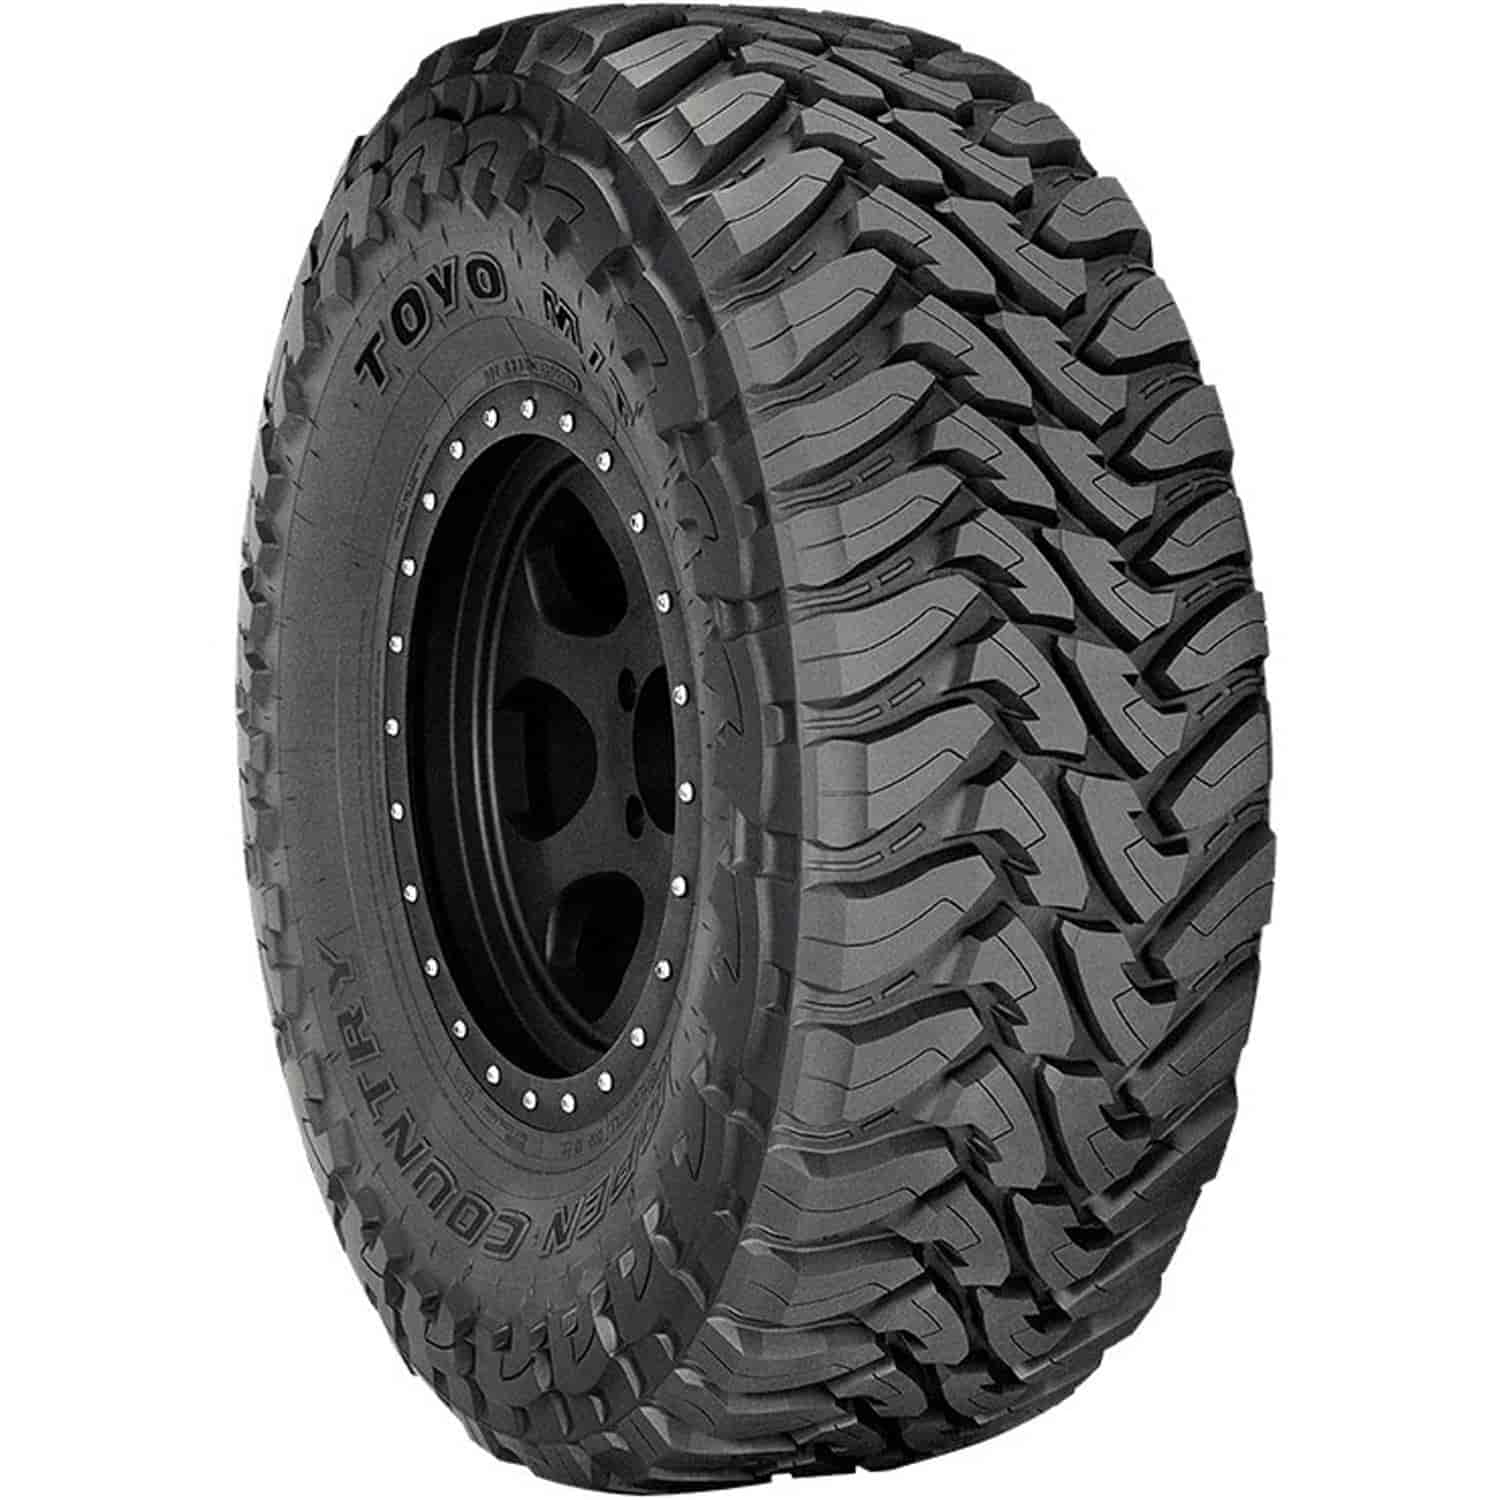 Open Country M/T Tire LT285/70R17